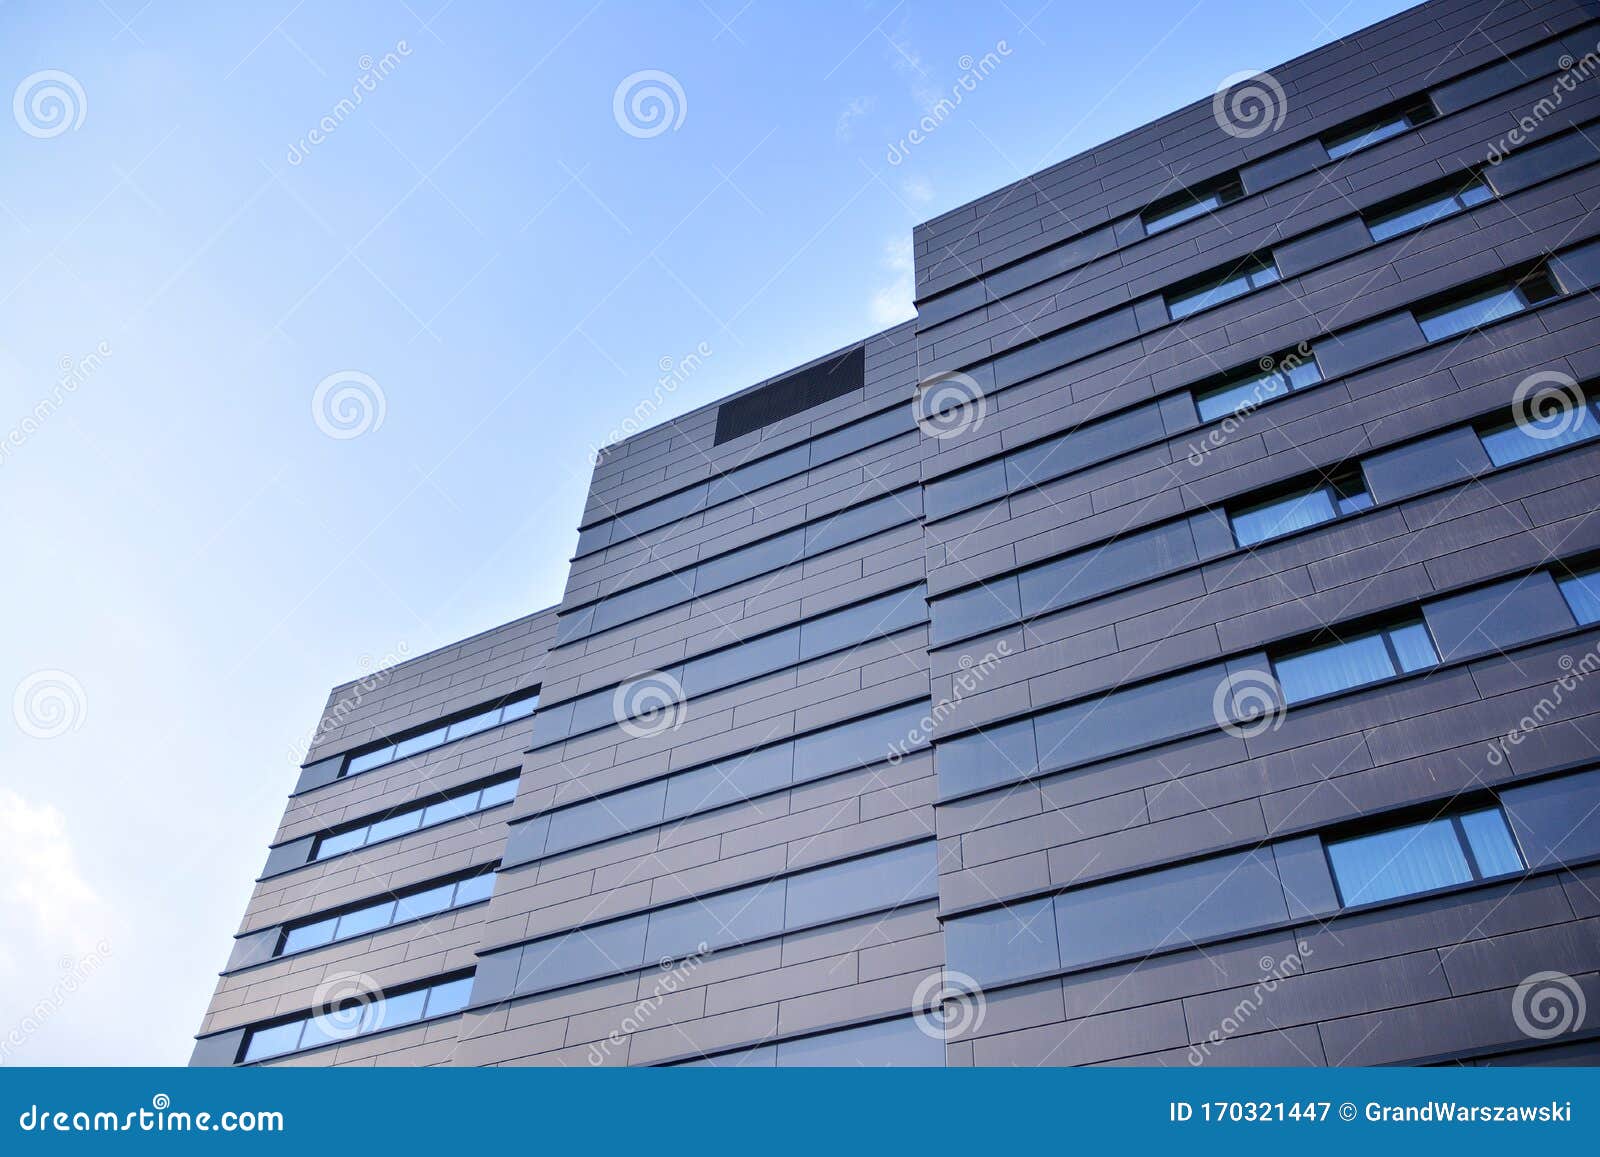 A View at a Straight Facade of a Modern Building with a Dark Grey ...